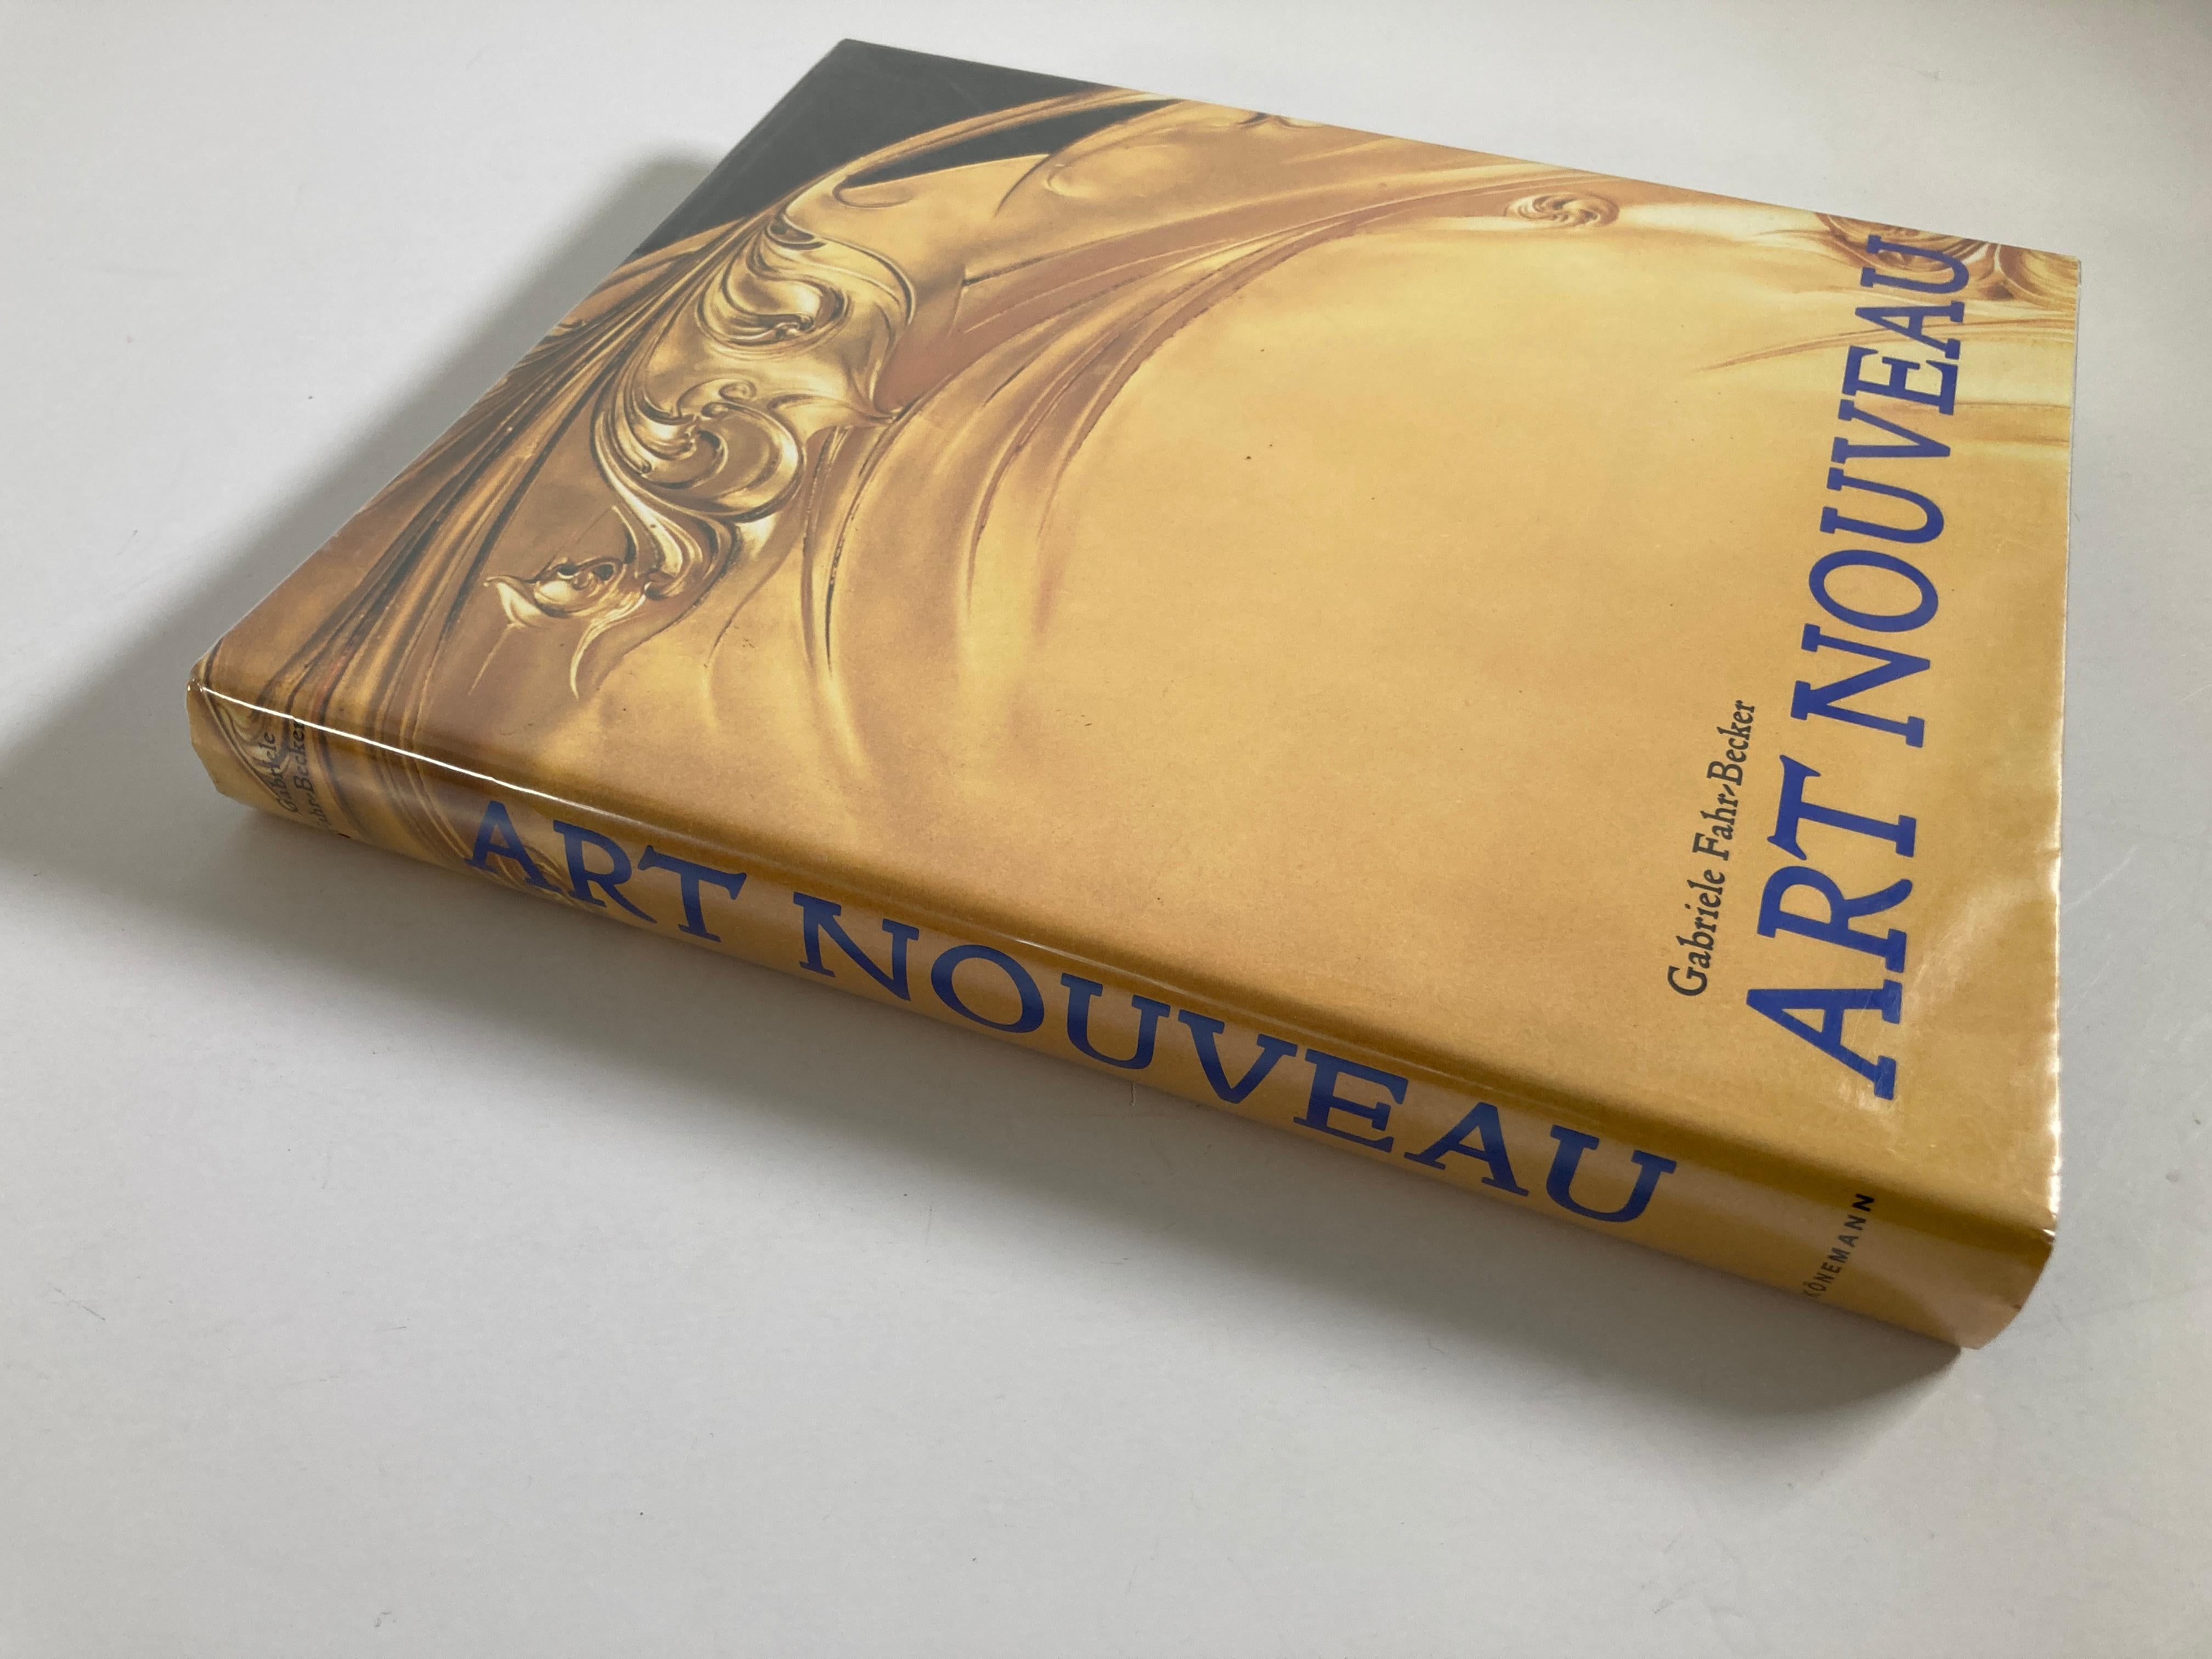 Art Nouveau, hardcover photo illustrated book-Gabriele Fahr-Becker Author.
Hardcover edition Art Nouveau by Gabriele Fahr-Becker.
Dust jacket, very good condition, like new. 
424pp., illustrated with color photographs.
Title: Art